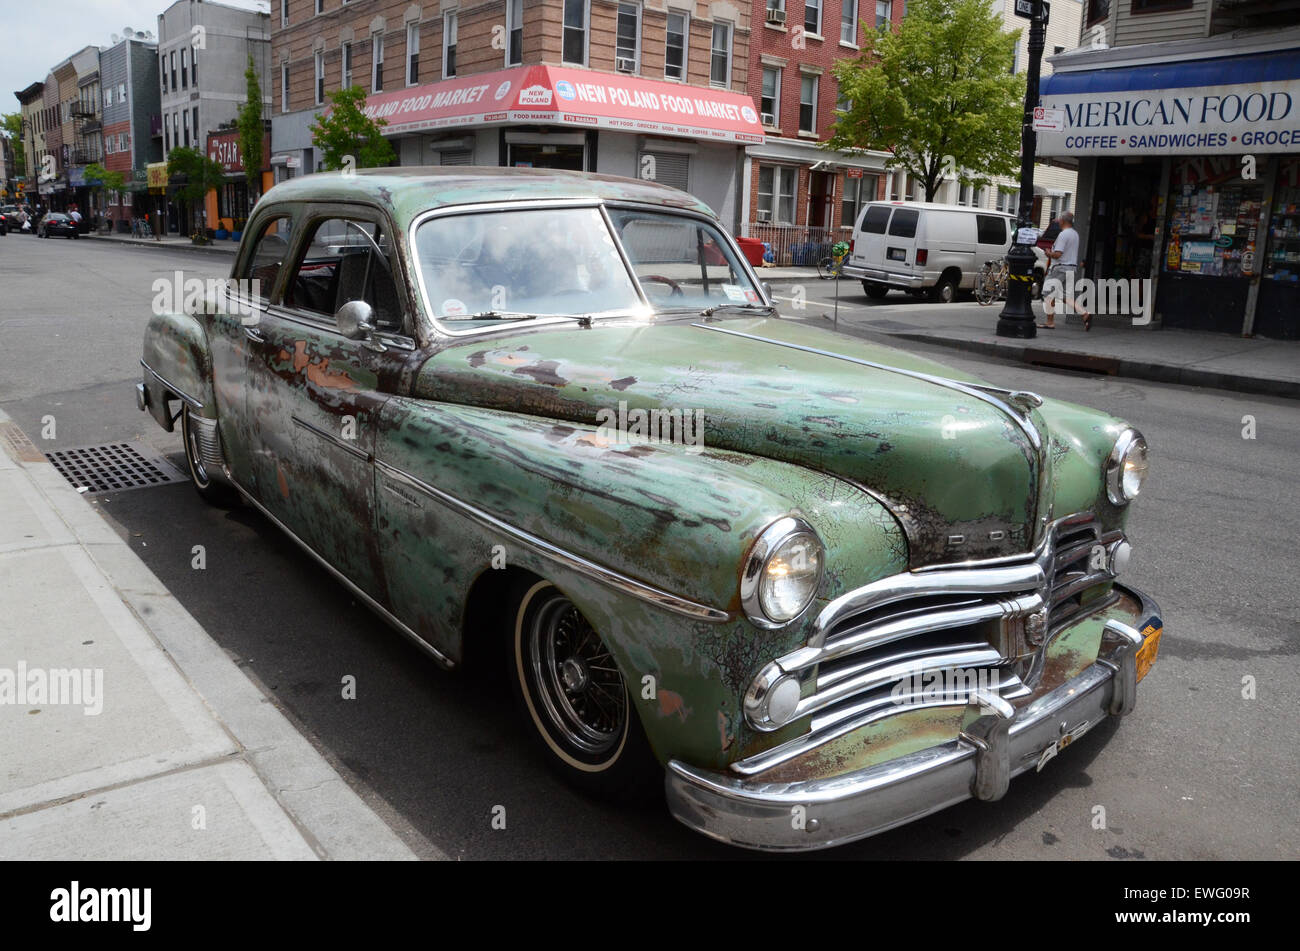 Limited Antique car age new york with Best Inspiration